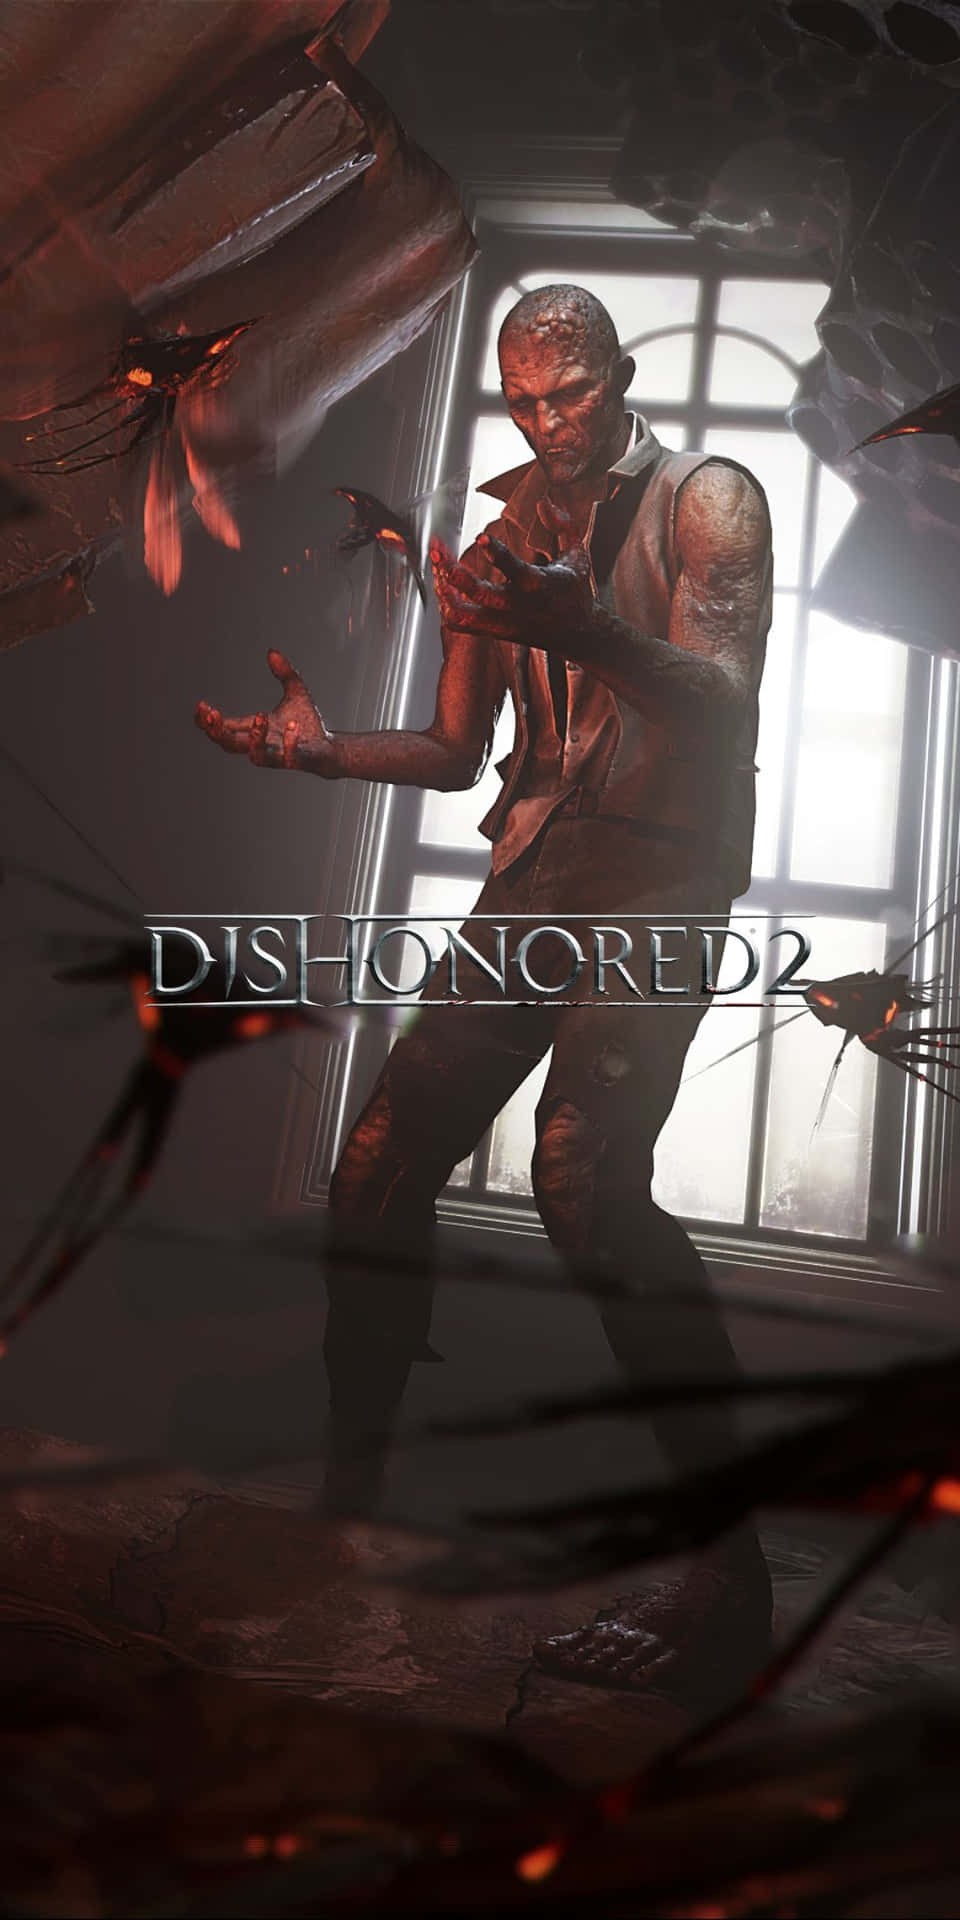 Pixel 3 and Dishonored 2 — a perfect combination